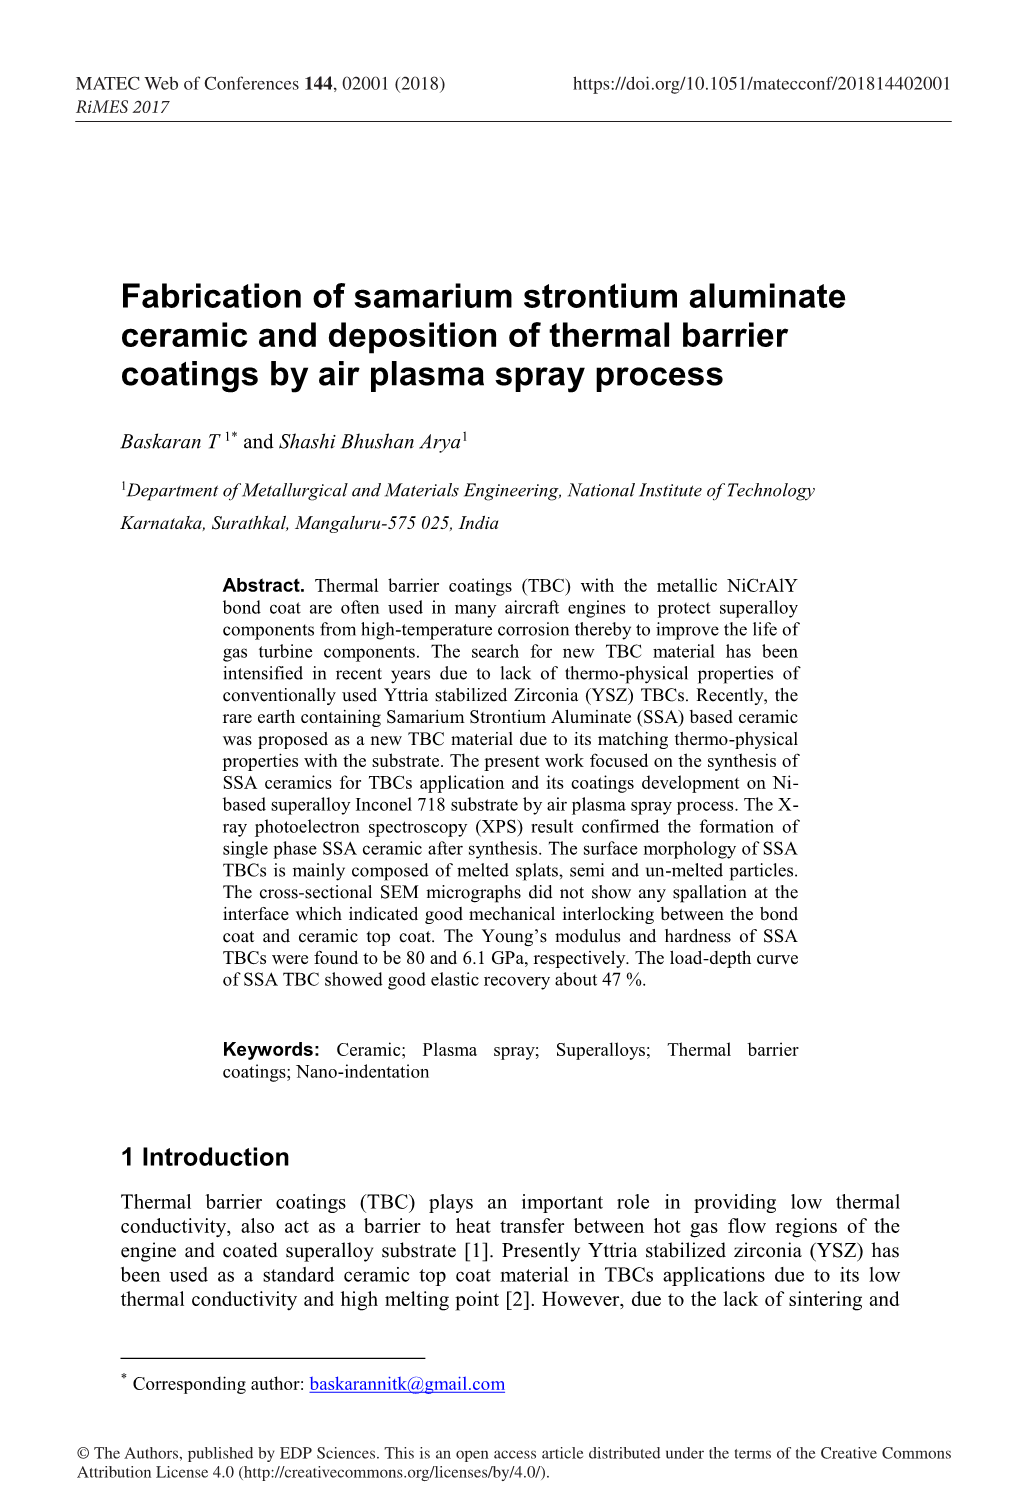 Fabrication of Samarium Strontium Aluminate Ceramic and Deposition of Thermal Barrier Coatings by Air Plasma Spray Process